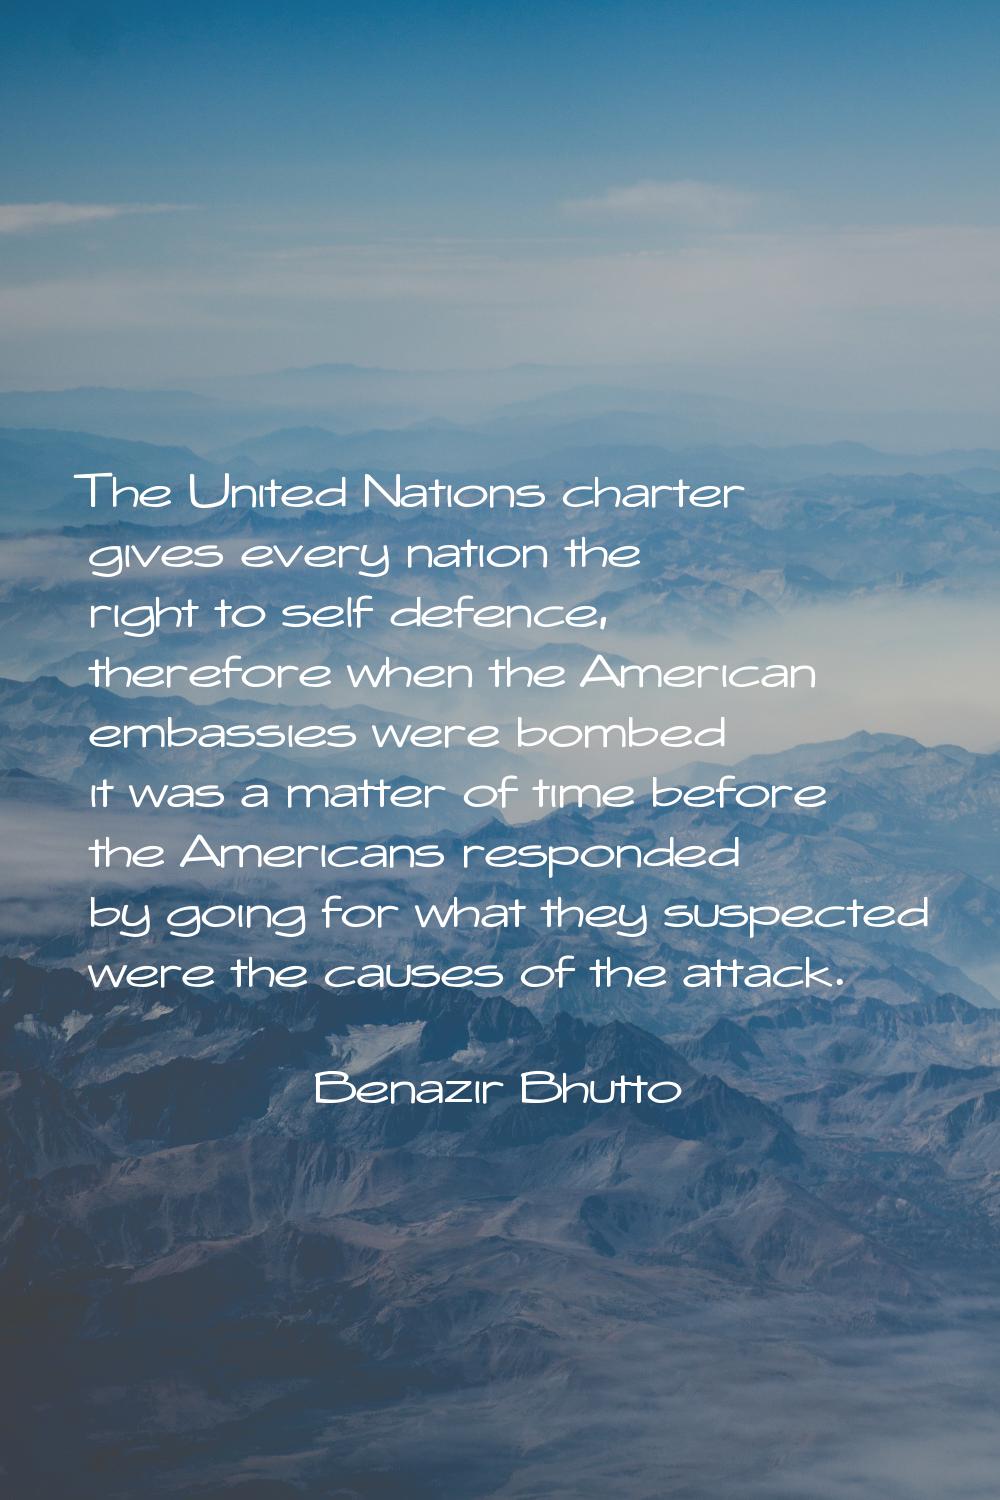 The United Nations charter gives every nation the right to self defence, therefore when the America